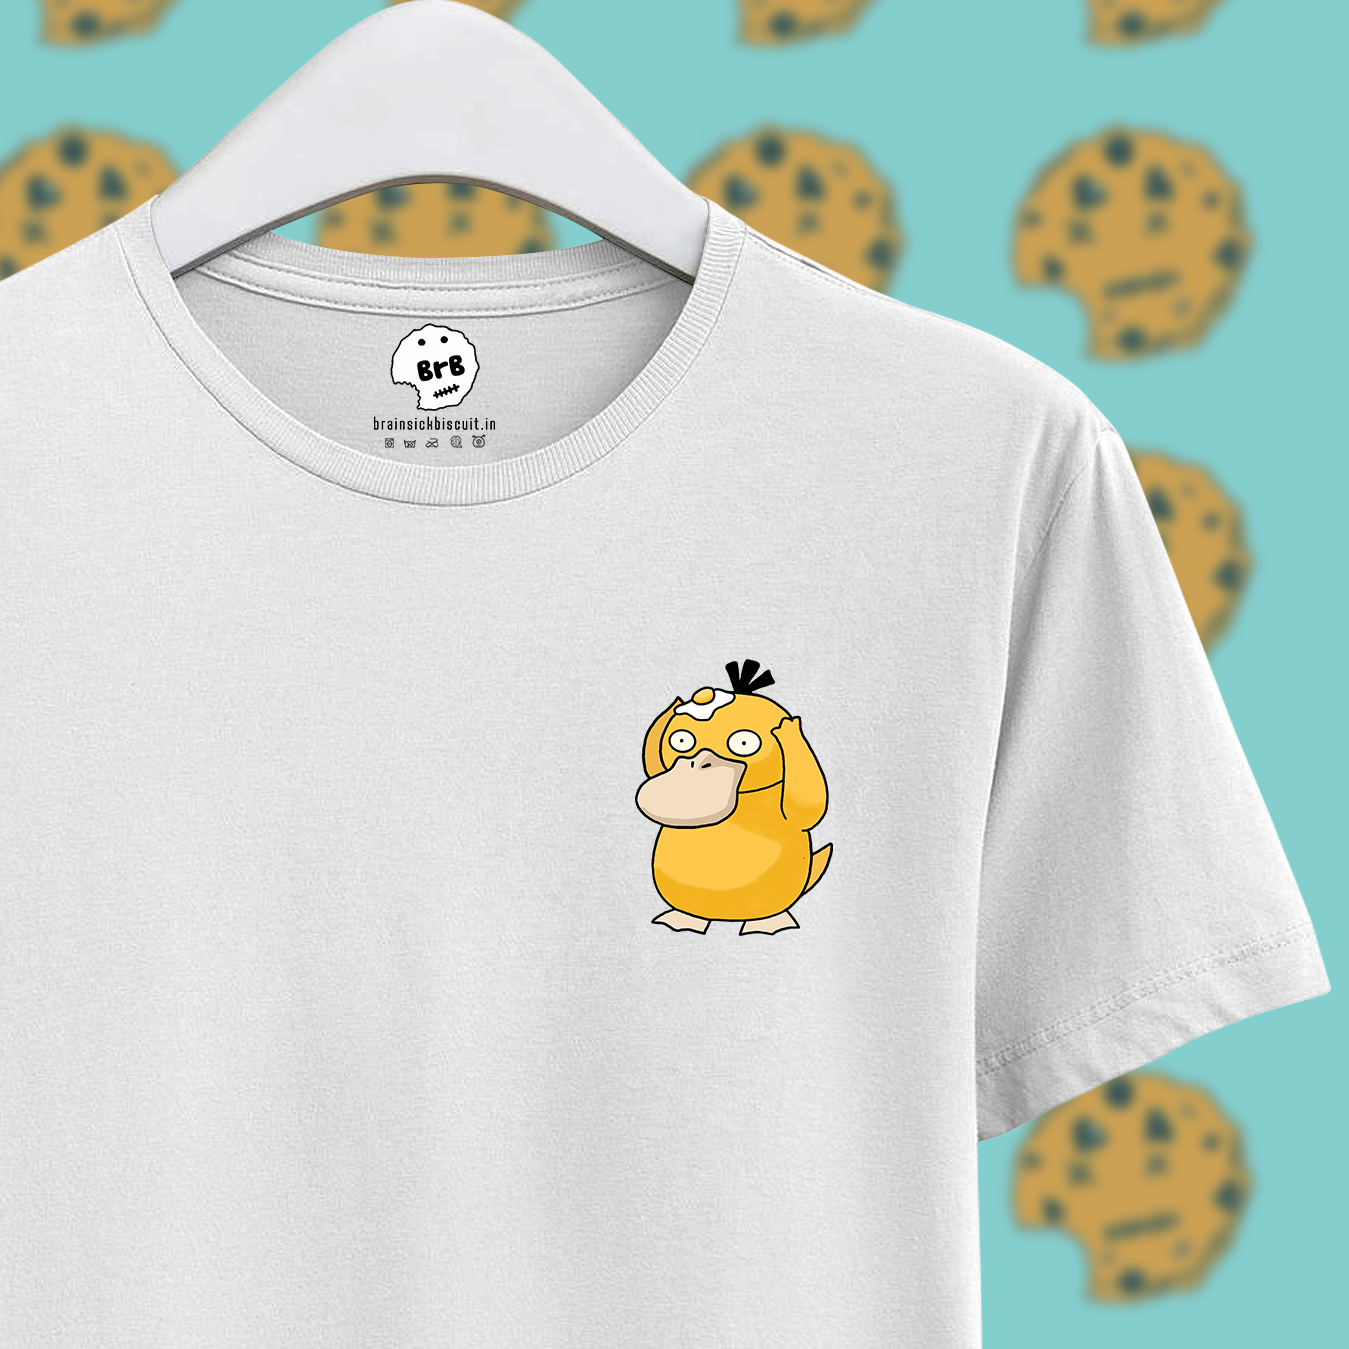 psyduck with omlette on head on white unisex half sleeves t-shirt